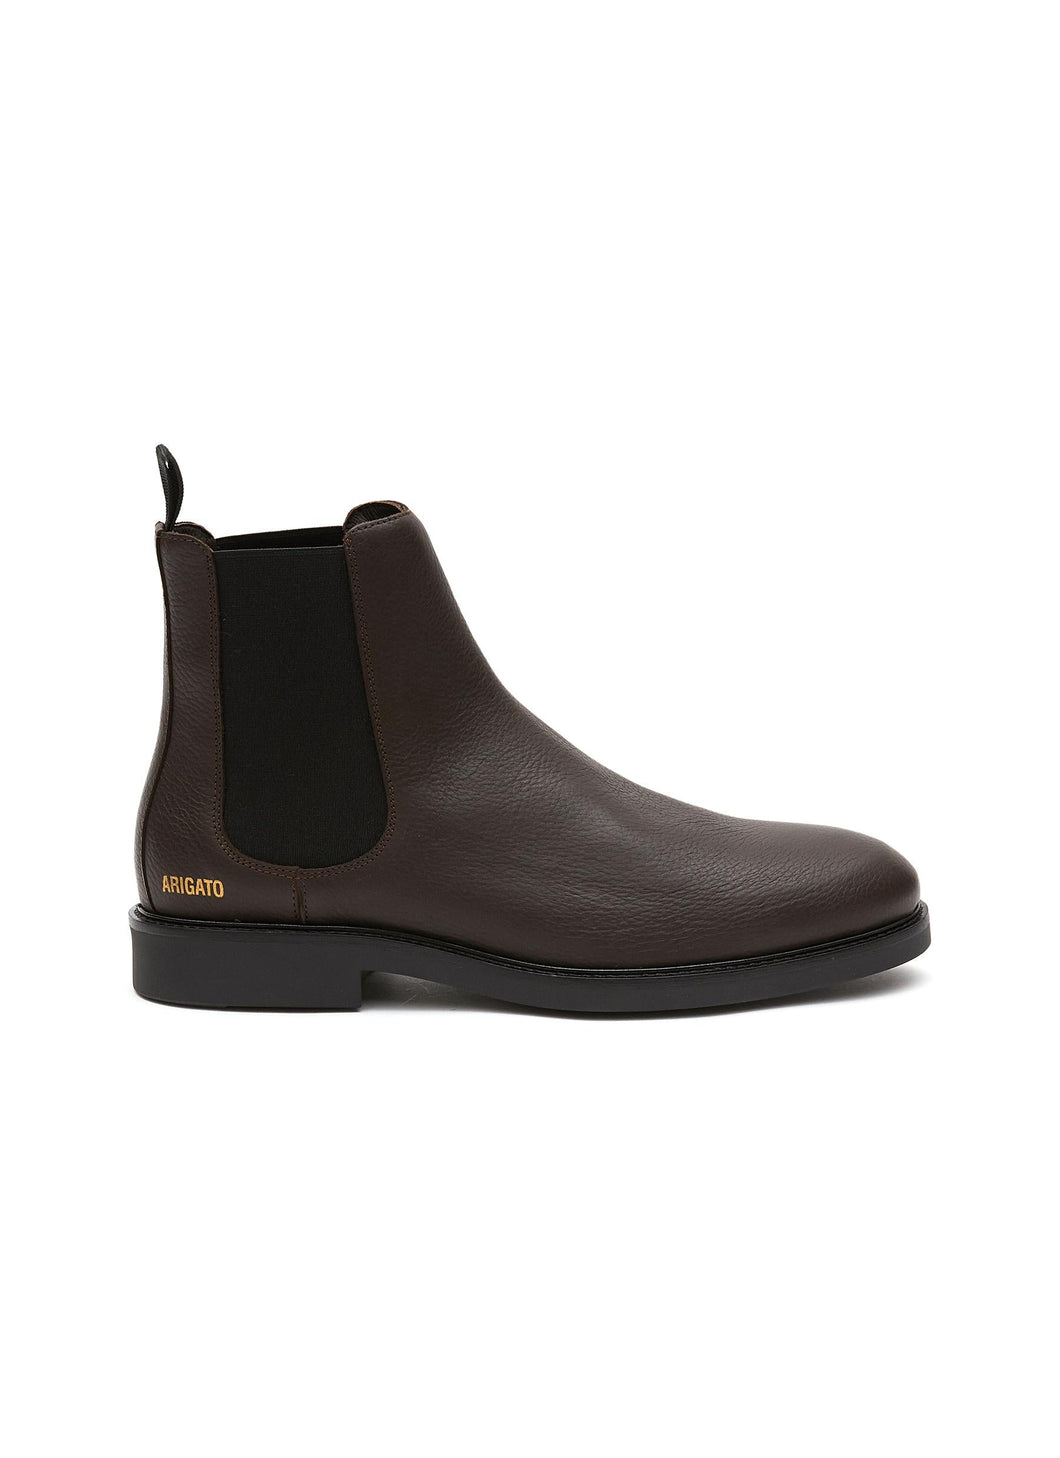 LOGO PRINT LEATHER CHELSEA BOOTS